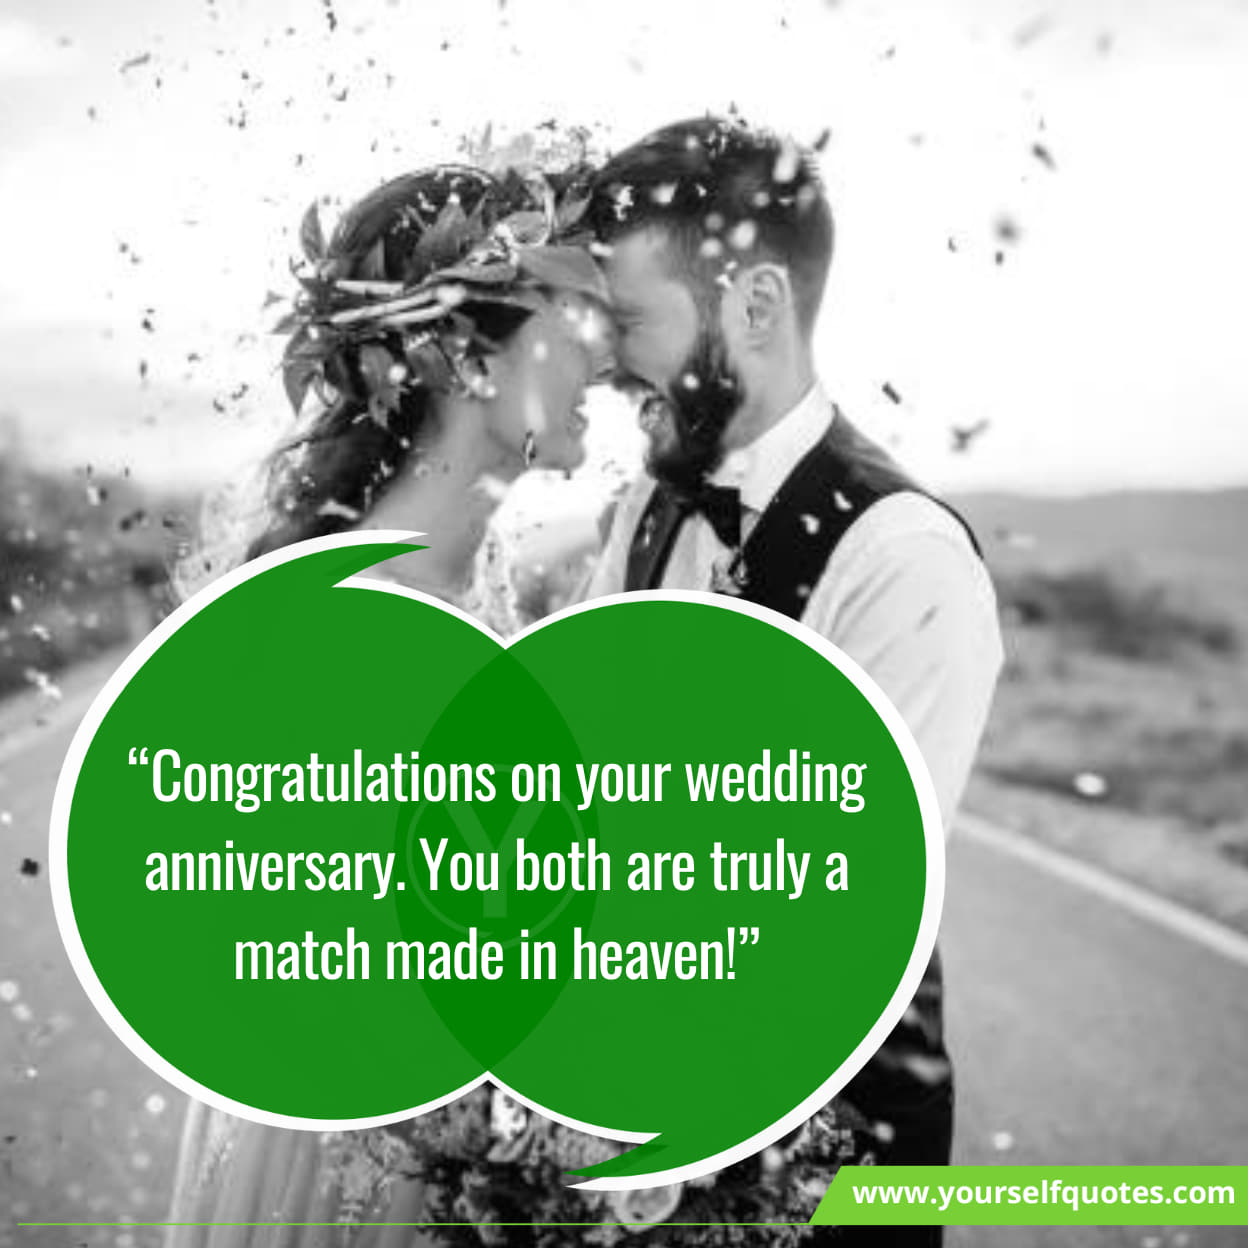 Inspiring Quotes For Wedding Anniversary